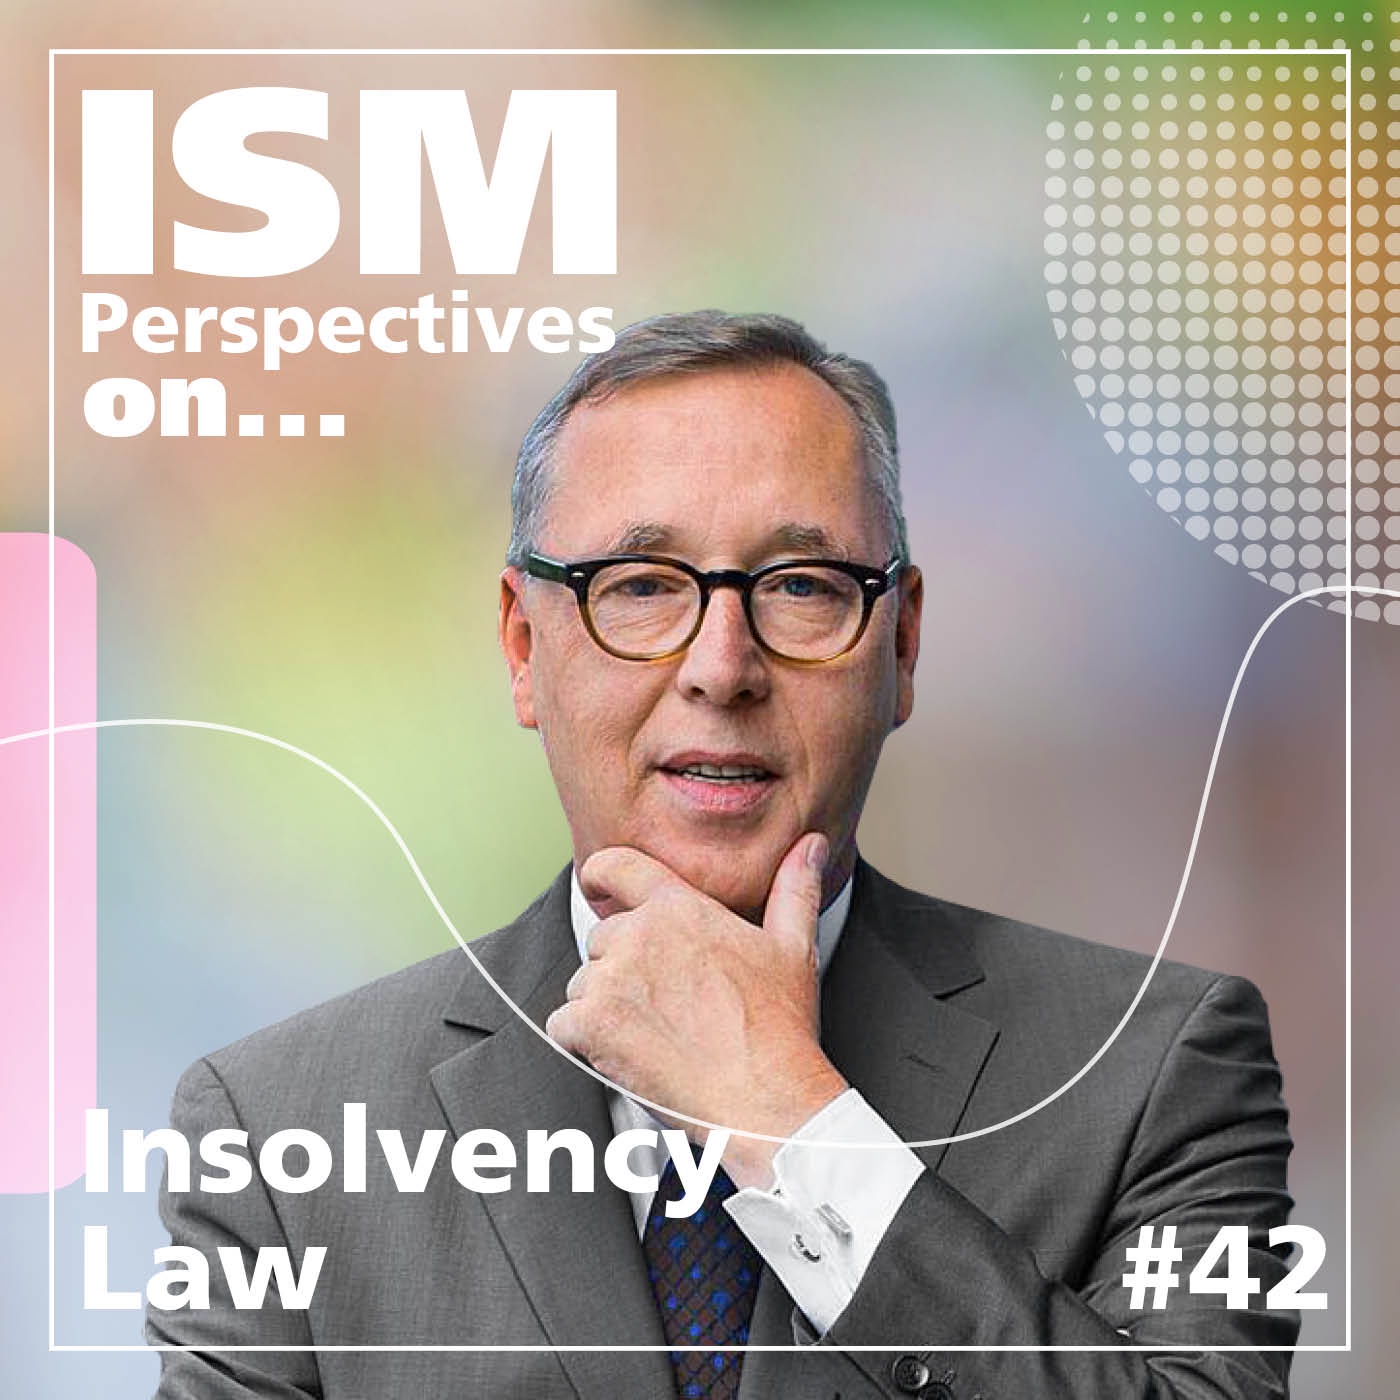 Perspectives on: Insolvency Law